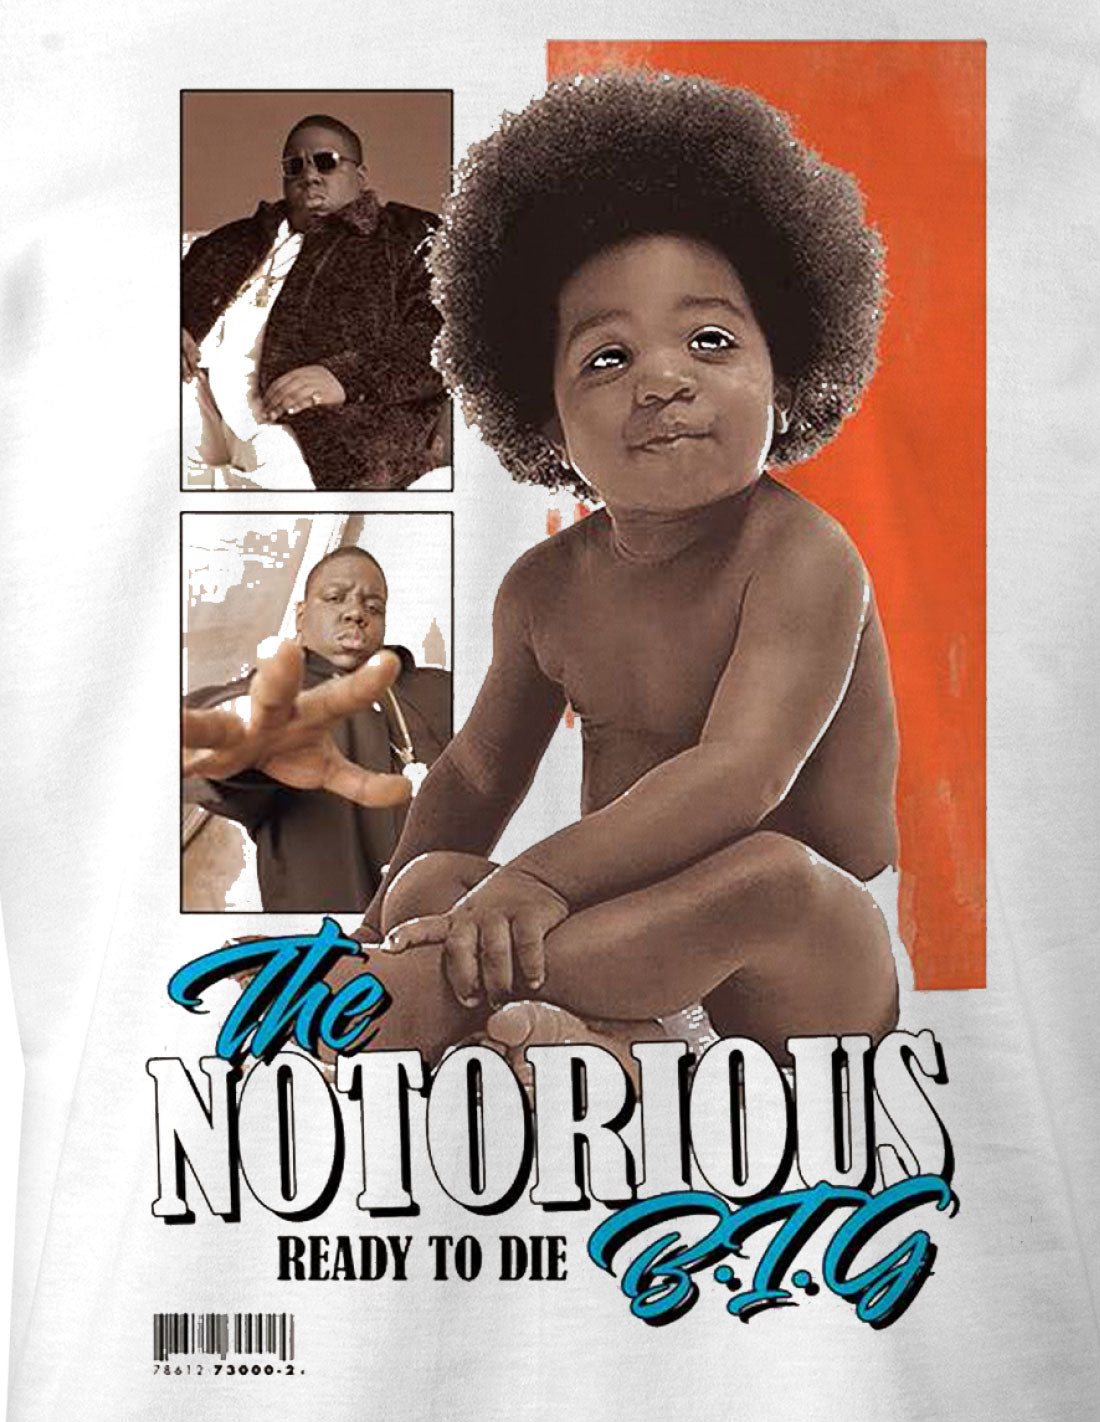 The Notorious BIG Tee - Ready to Die